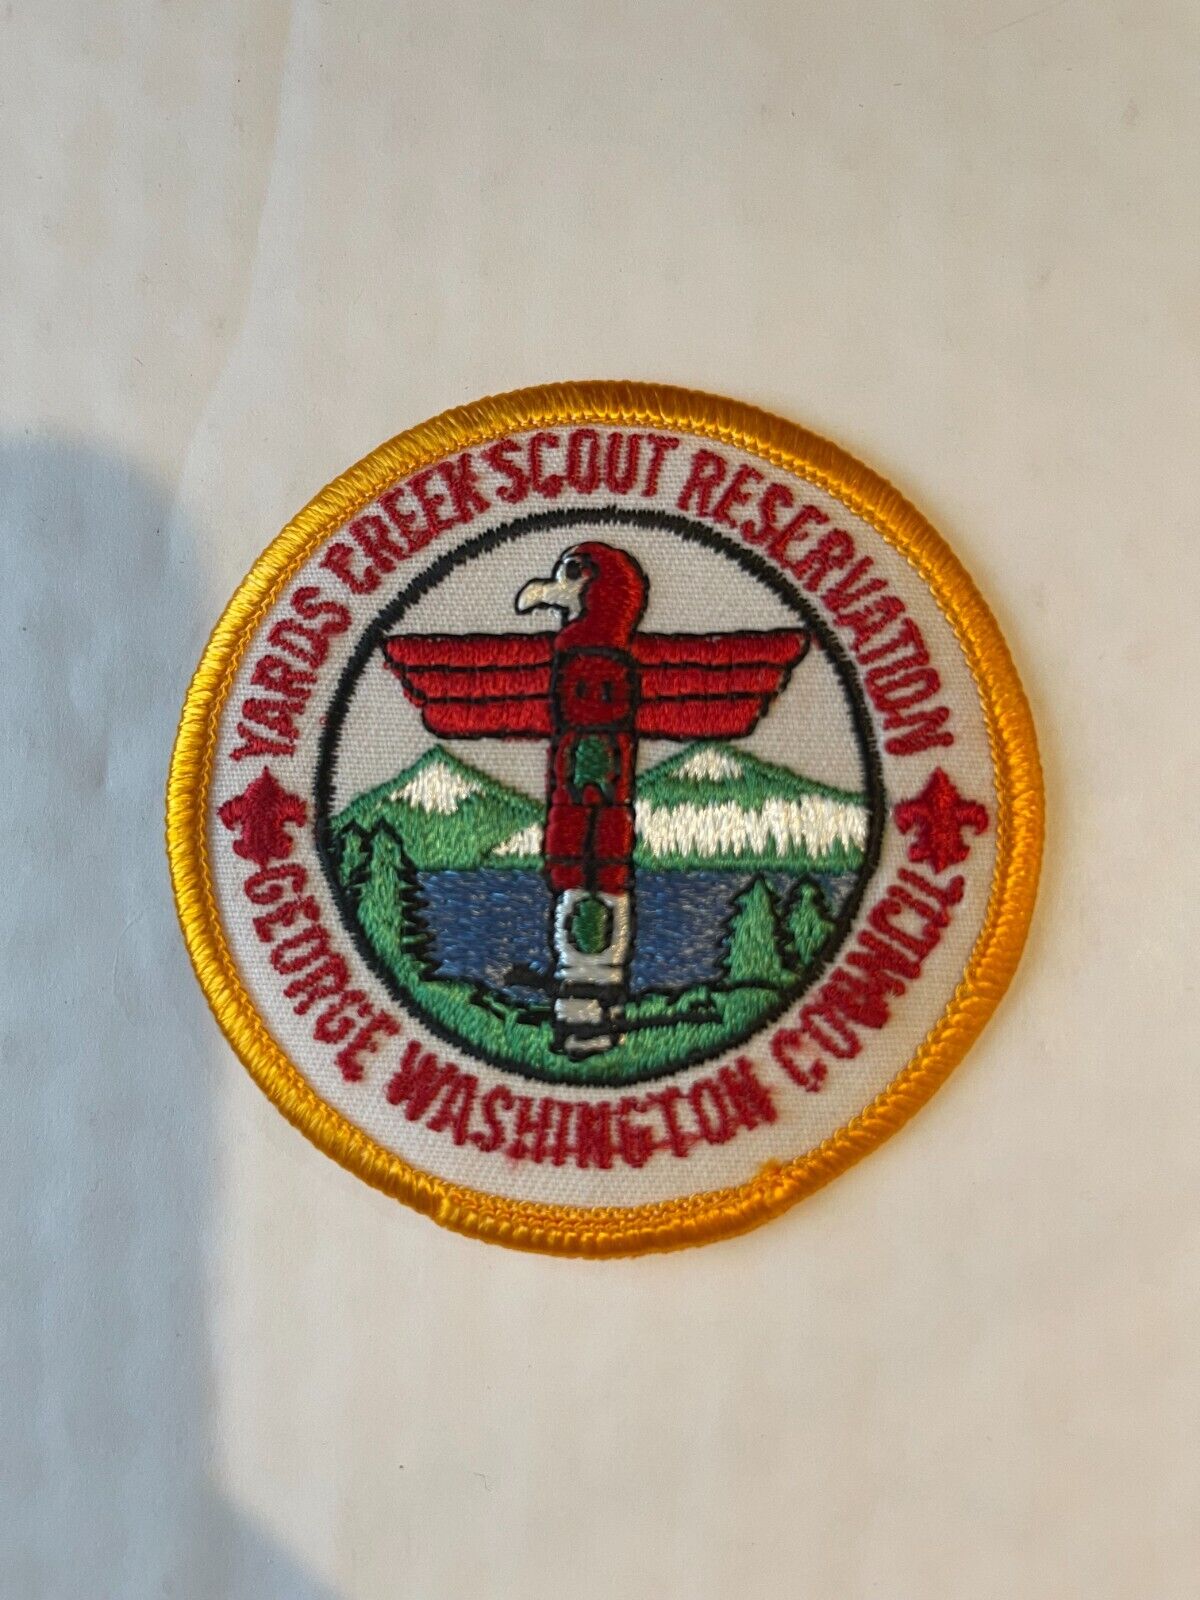 YARDS CREEK SCOUT RESERVATION PATCH * GEORGE WASHINGTON COUNCIL BSA